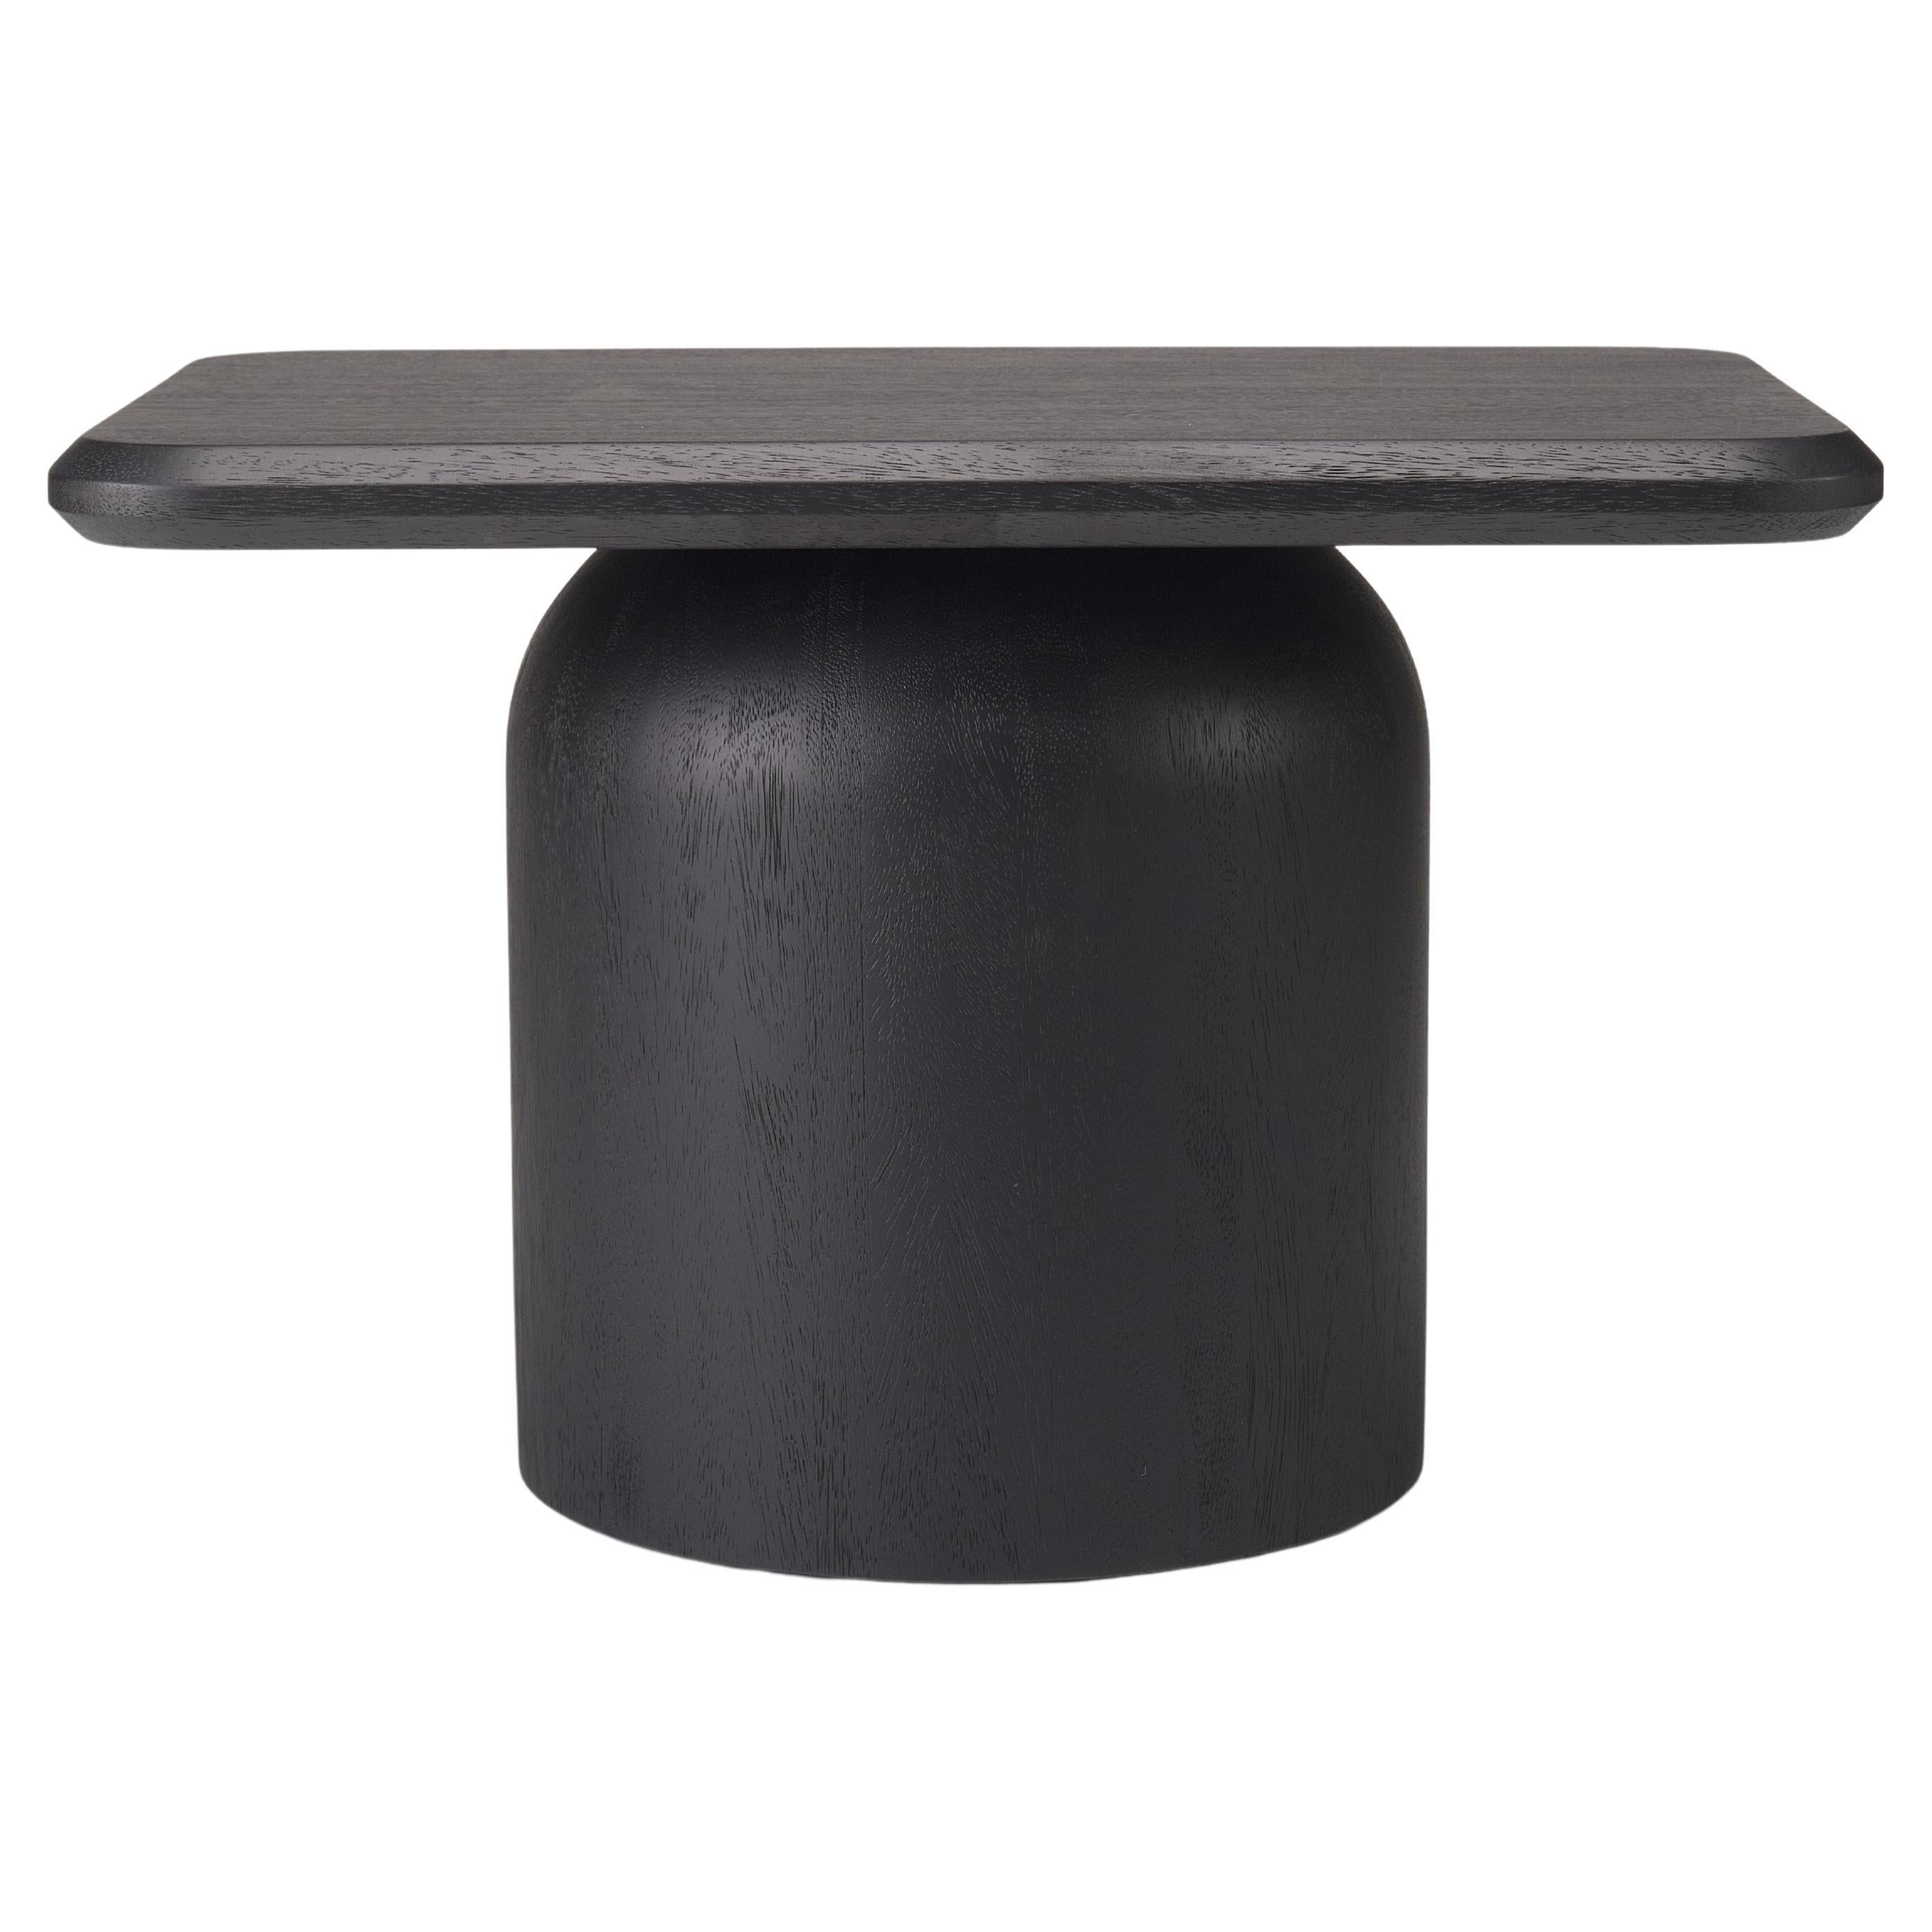 Cupola Rectangular Table Black Stain For Sale